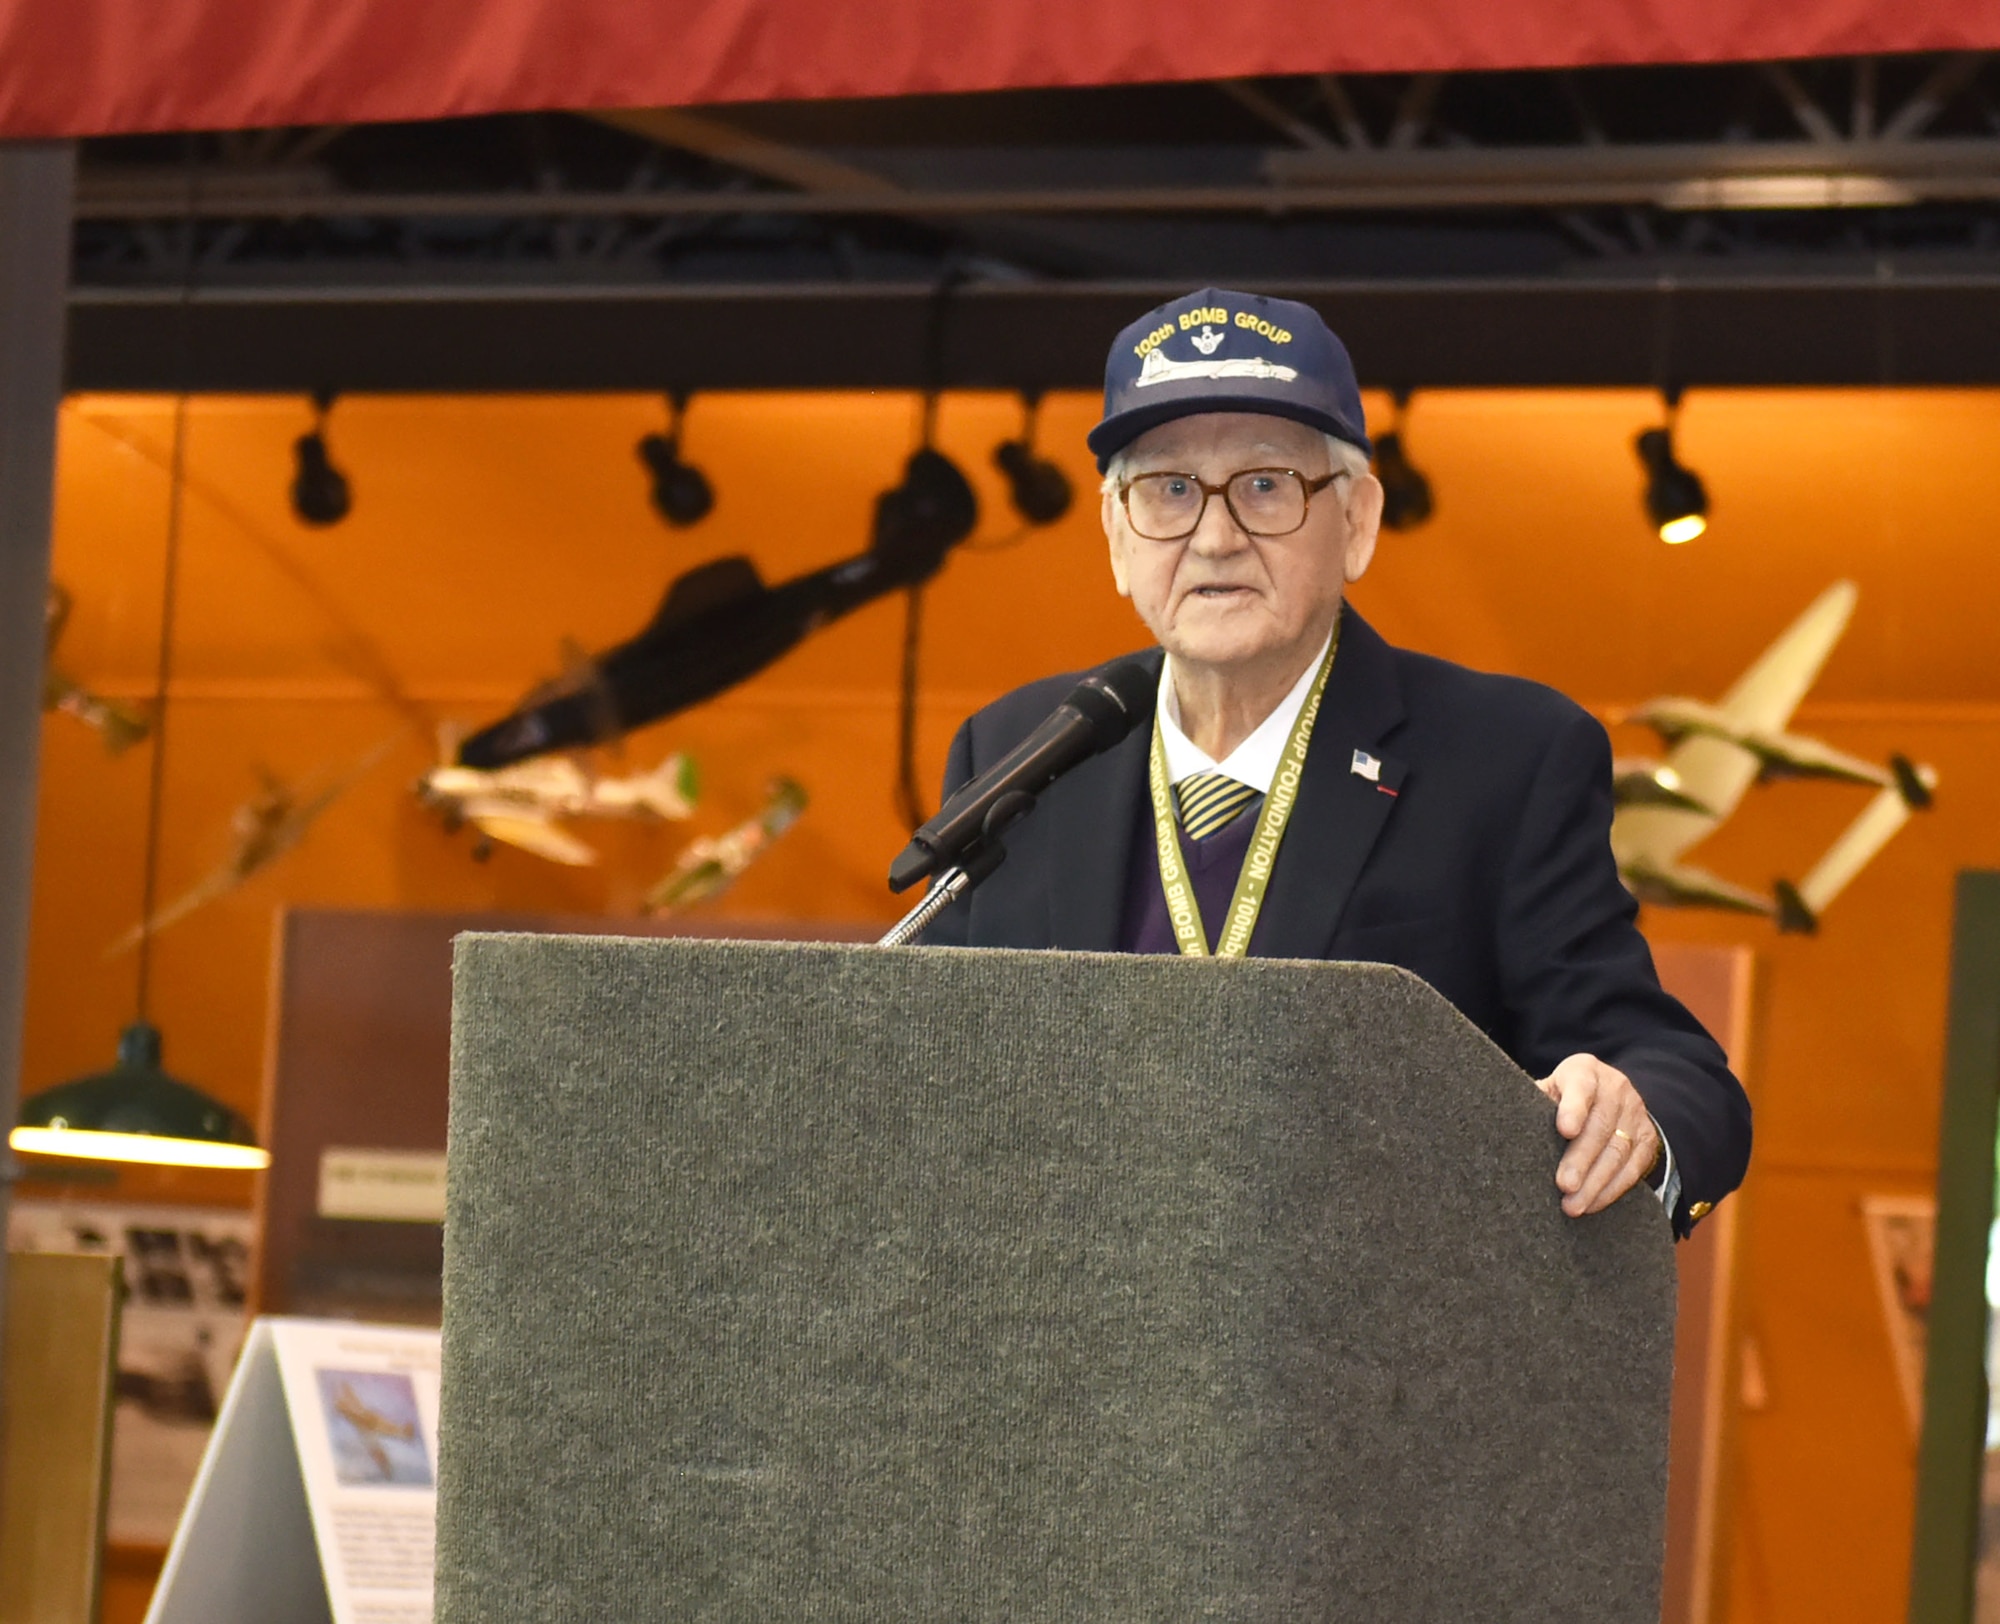 Retired 1st Lt. John A. Clark, former, 100th Bomb Group pilot and World War II veteran, shares stories of his life and how valuable the Women’s Air Force Service Pilots (also known as WASPs) contribution was to World War II, at the Cavenaugh Flight Museum during the 100th Bomb Group reunion in Dallas, Texas, Oct. 28, 2021. The reunion, held every other year in a different location within the States, brings together the 100th Bomb Group veterans, their families, and Airmen from the 100th Air Refueling Wing. (U.S. Air Force photo by Karen Abeyasekere